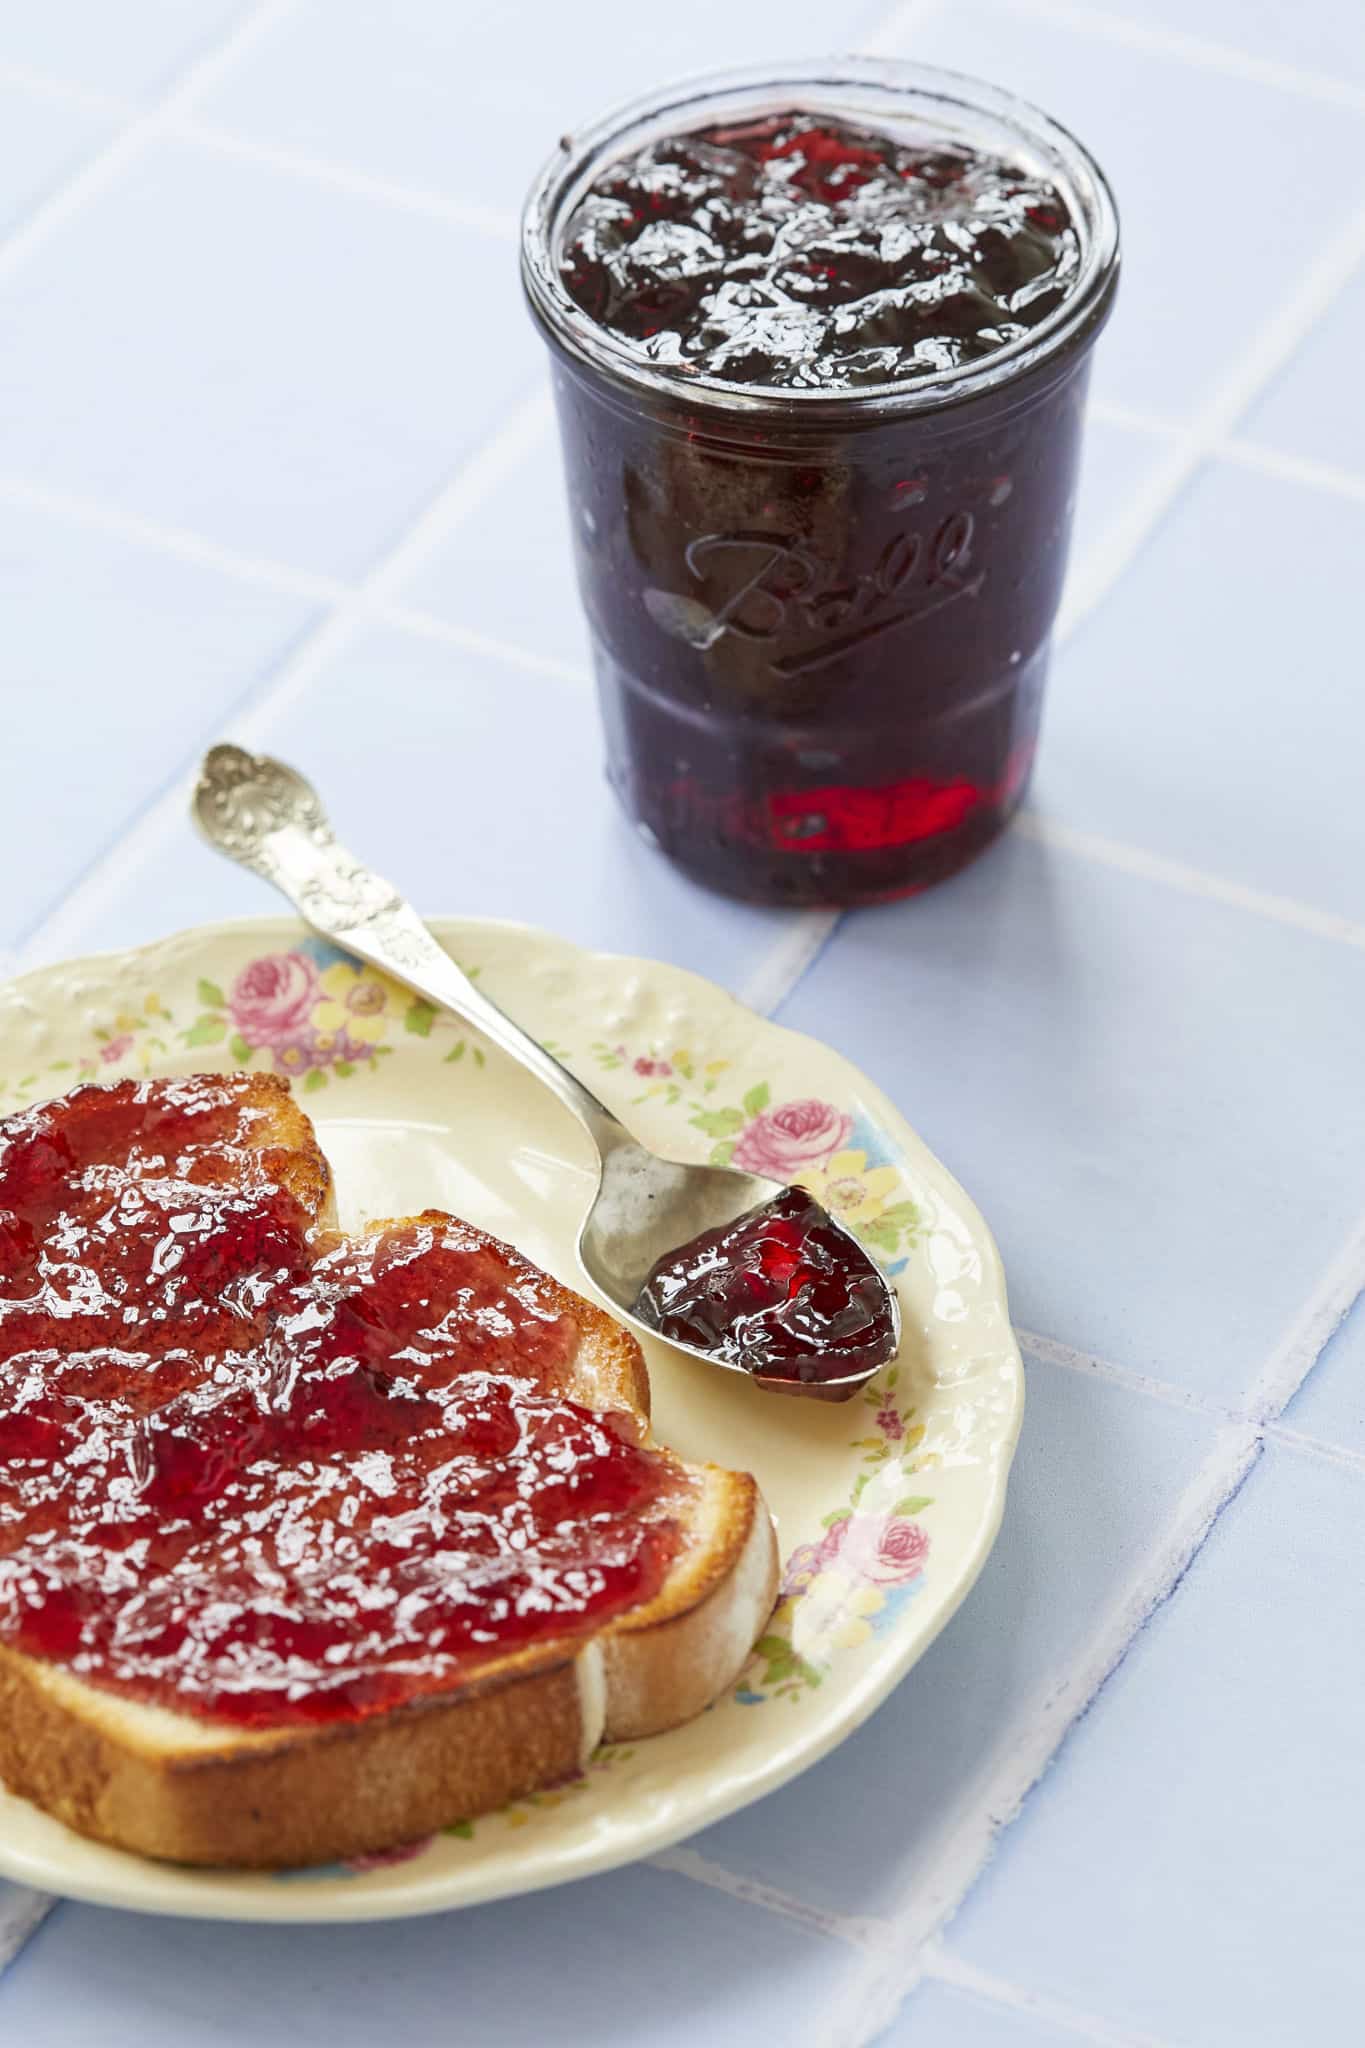 A jar of homemade jelly is displayed next to a slice of toast.